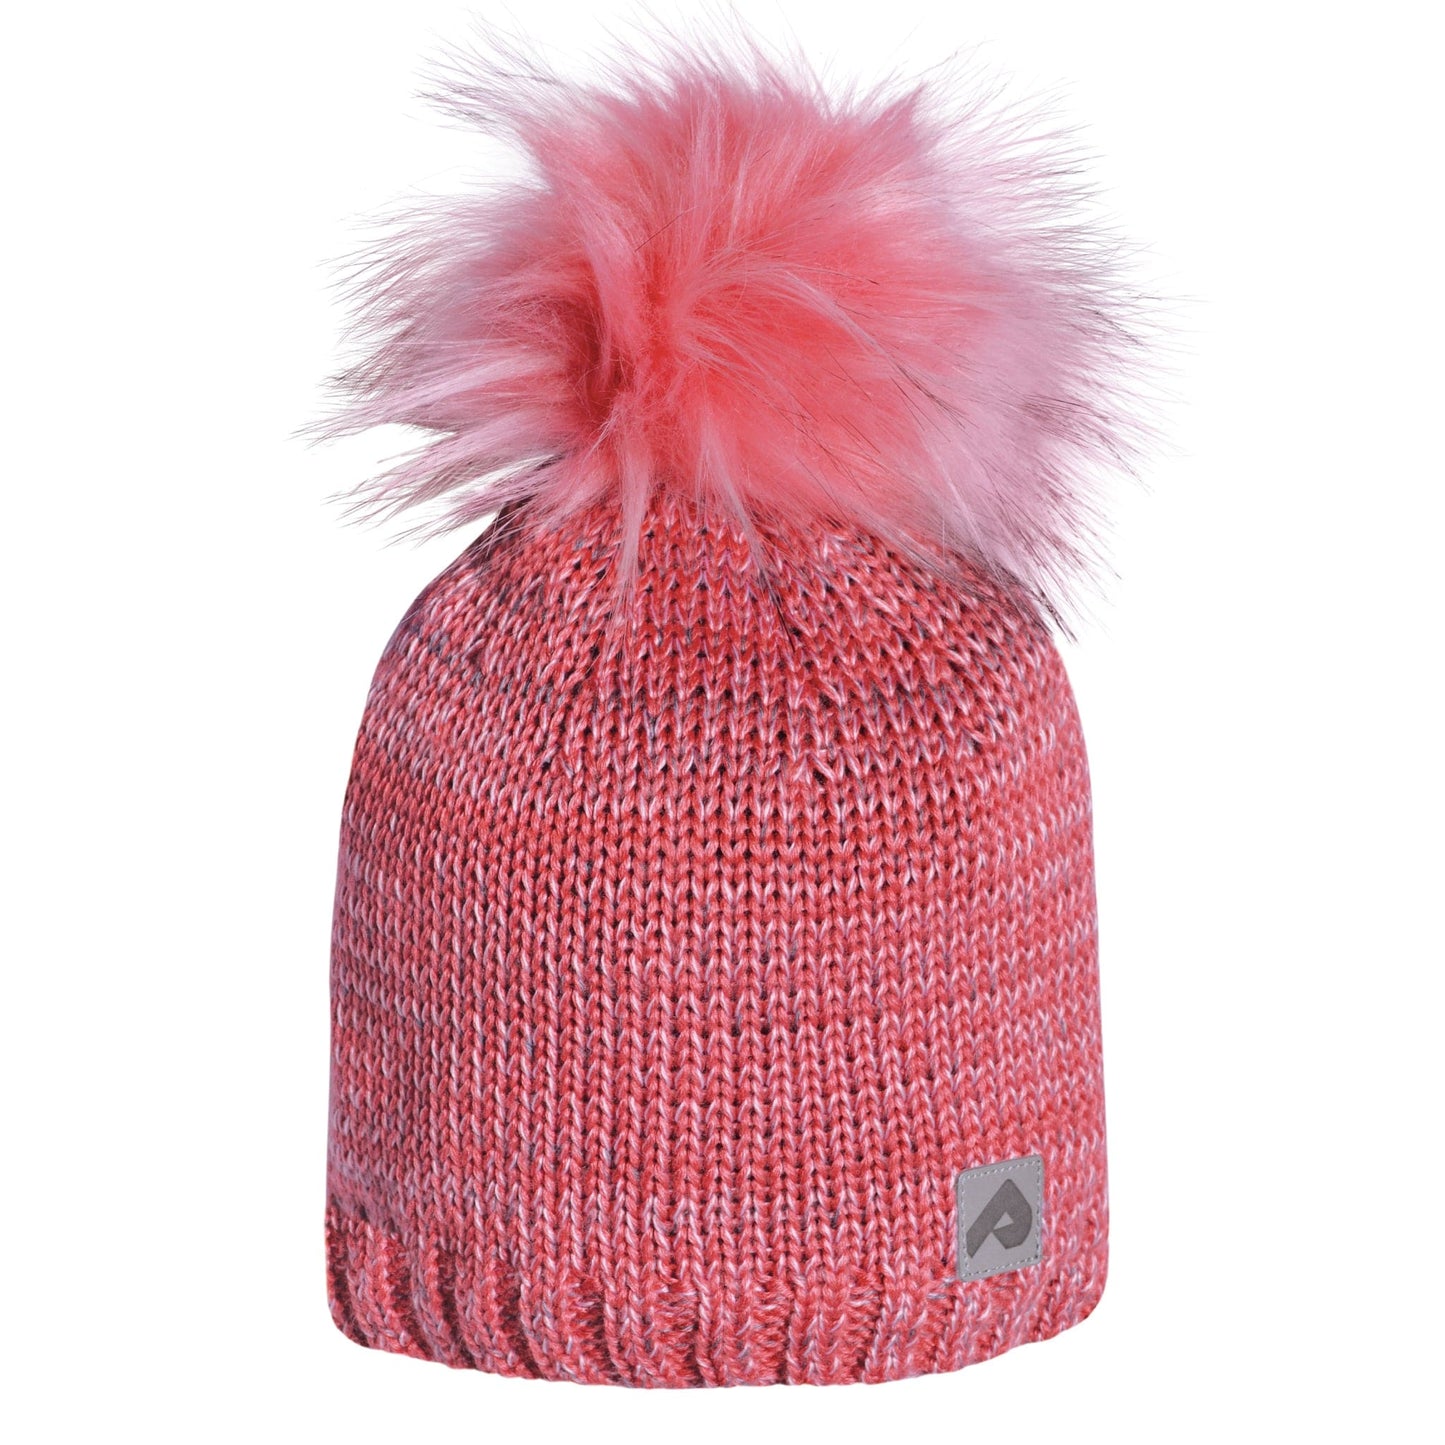 Winter hat with removable pompom - Multi Pink